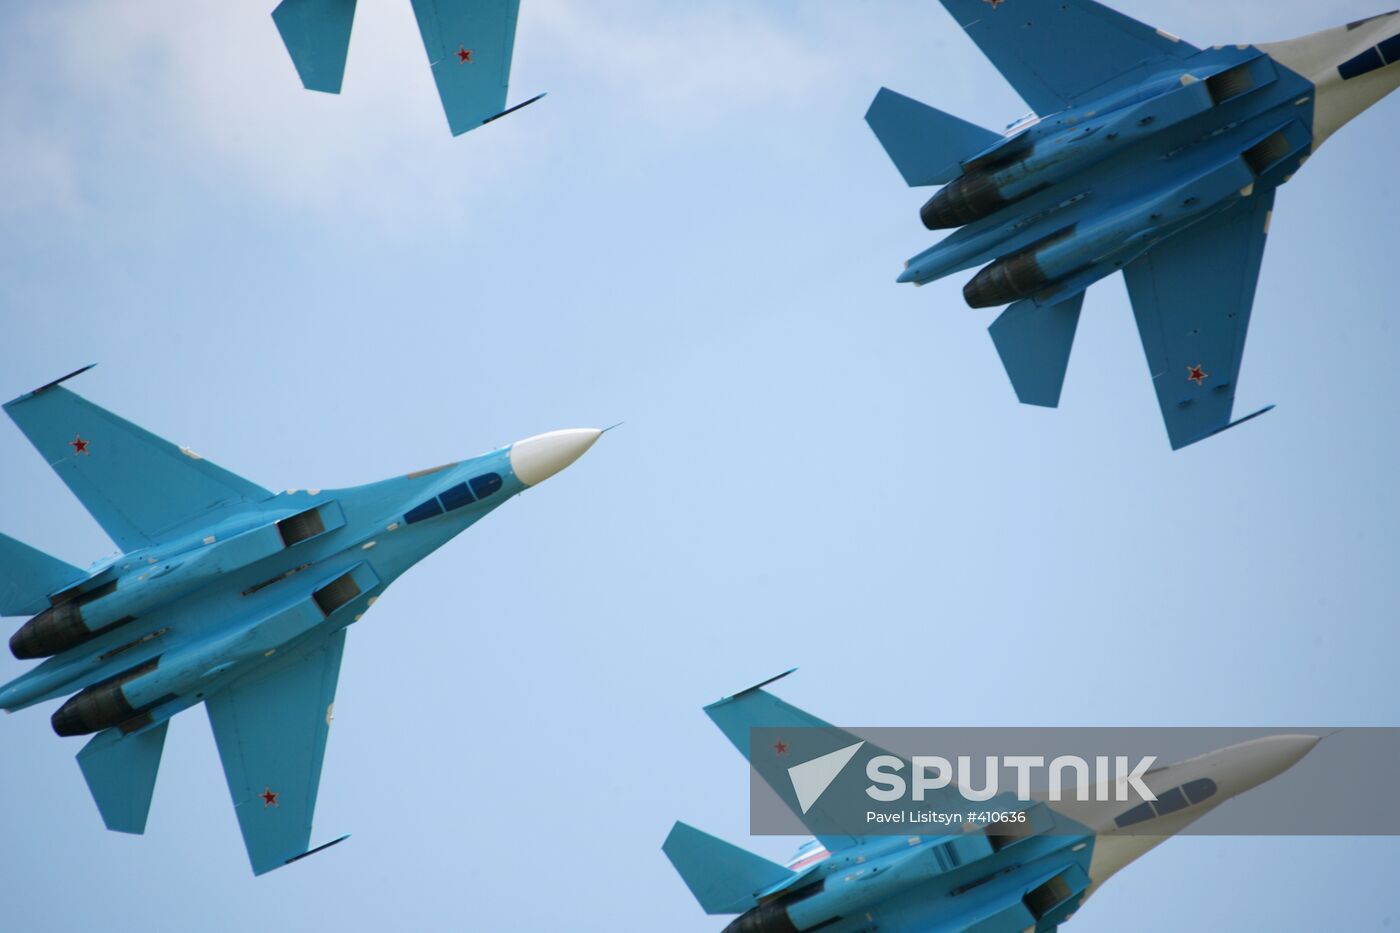 Sukhoi Su-27 Flanker fighters